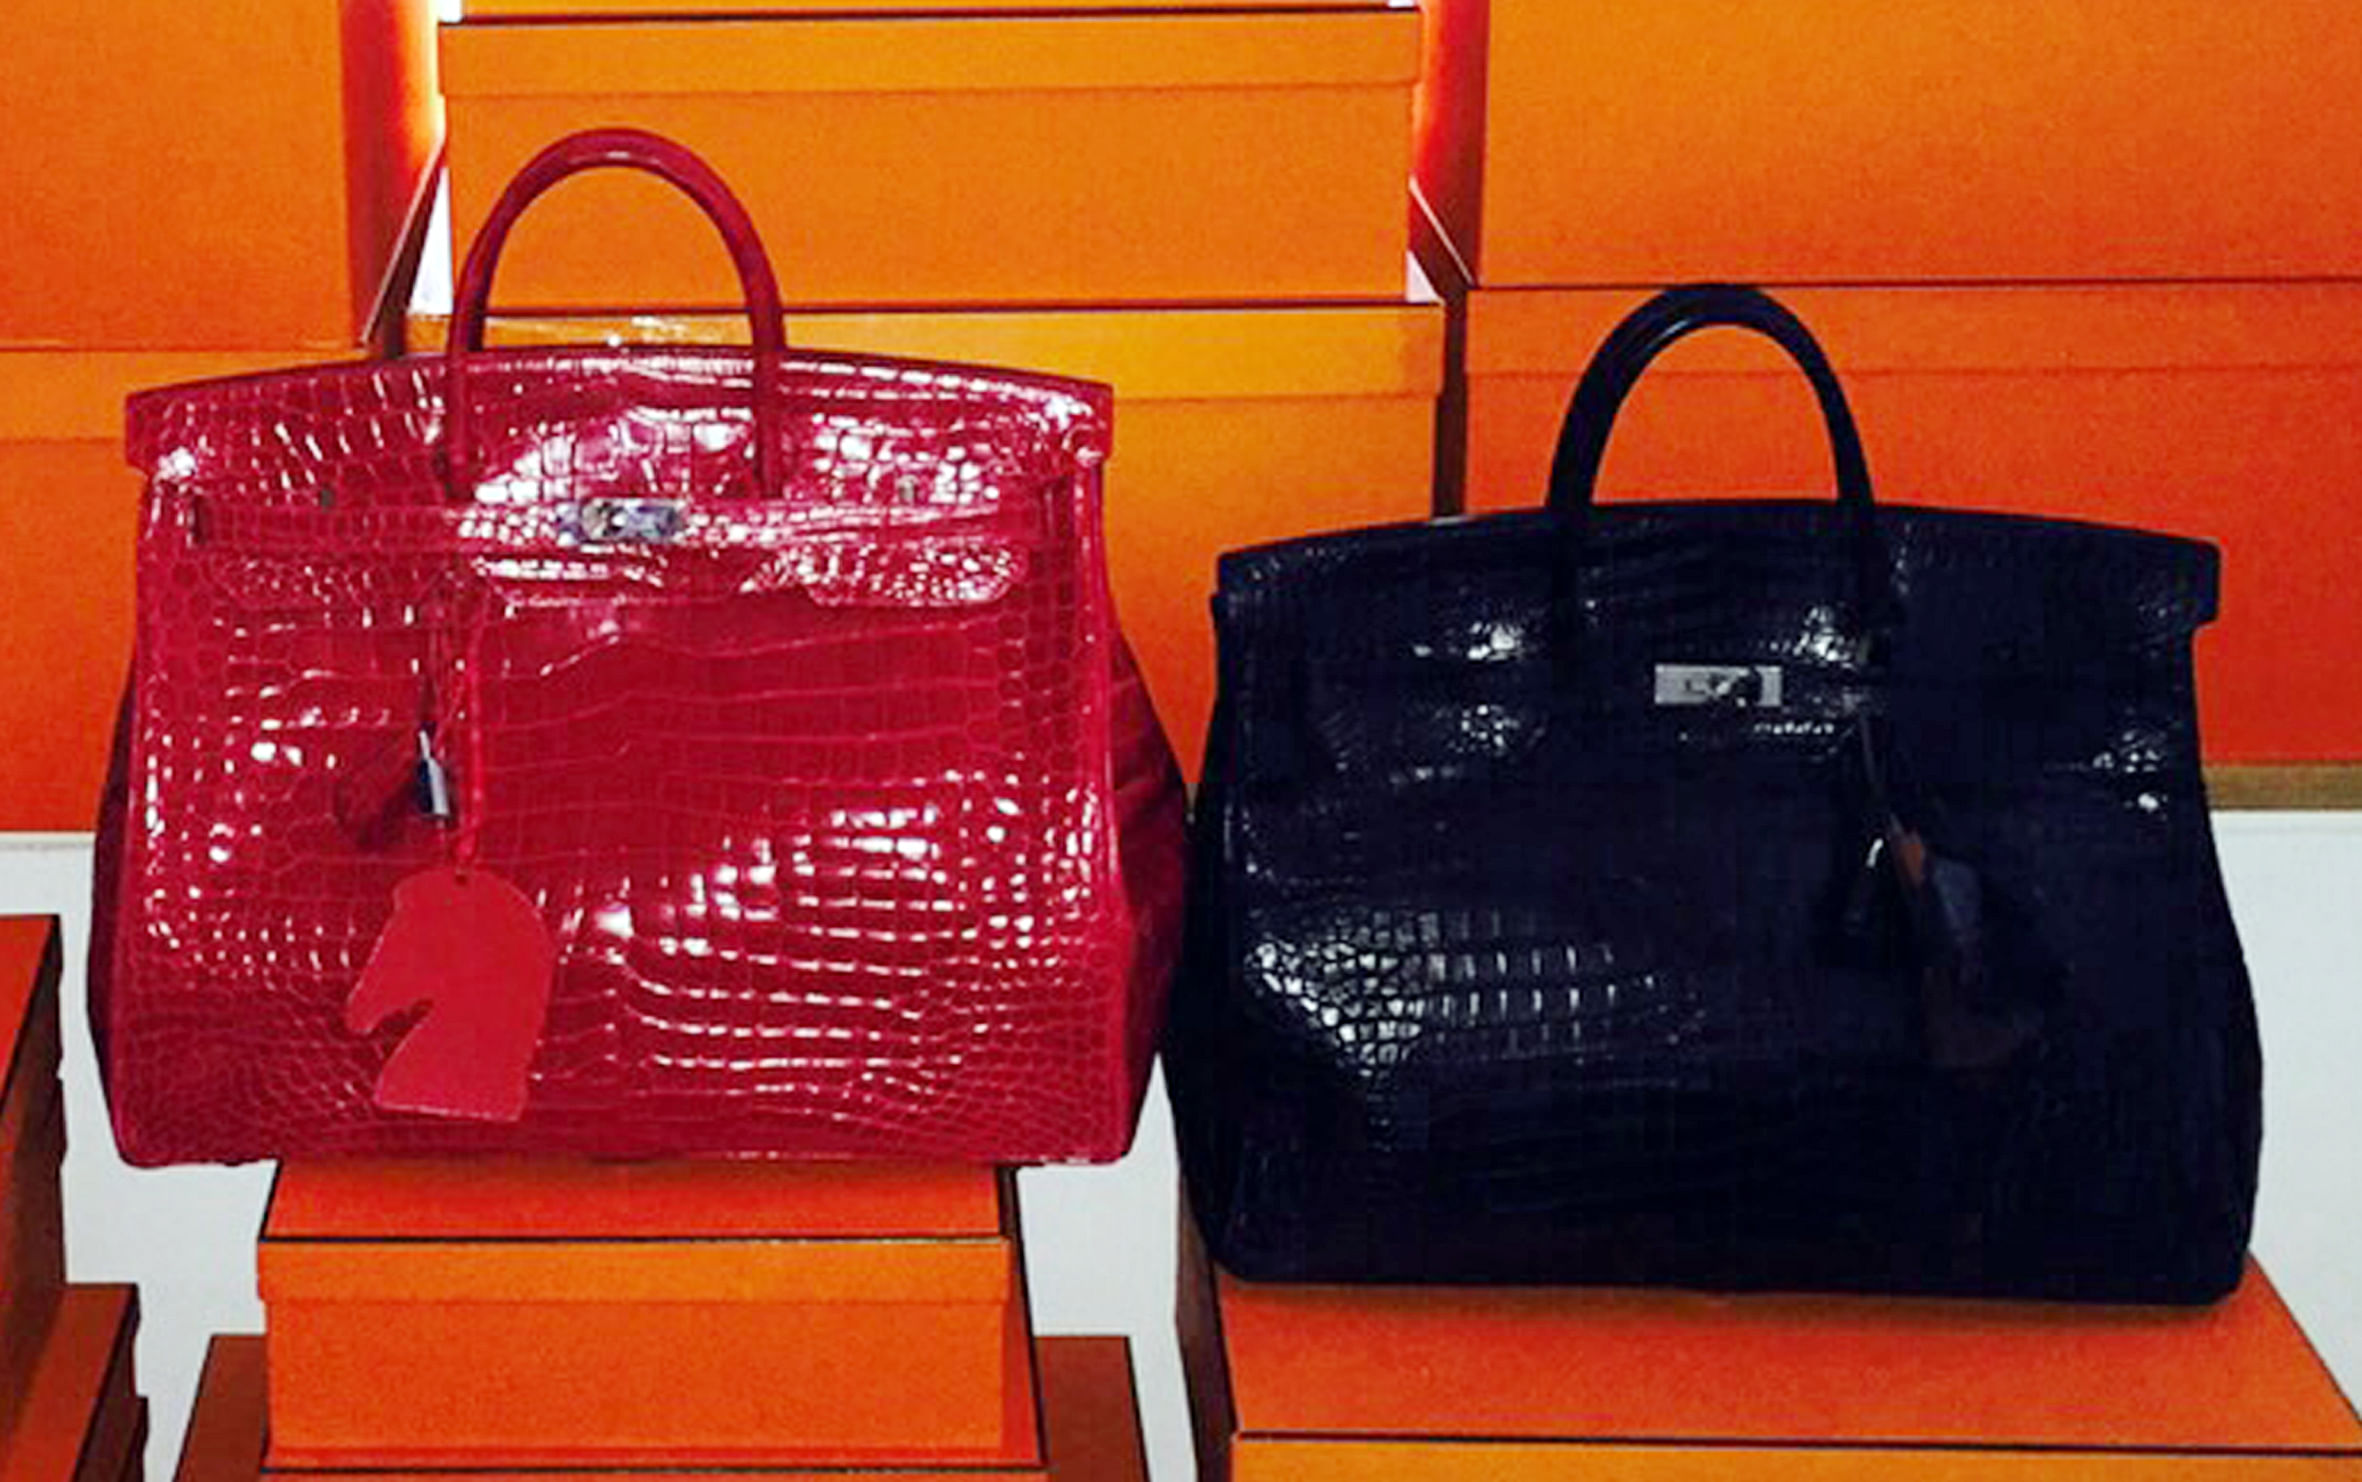 Crocodile-skin Hermes handbag sells for a record $222,912 at Christie's  auction